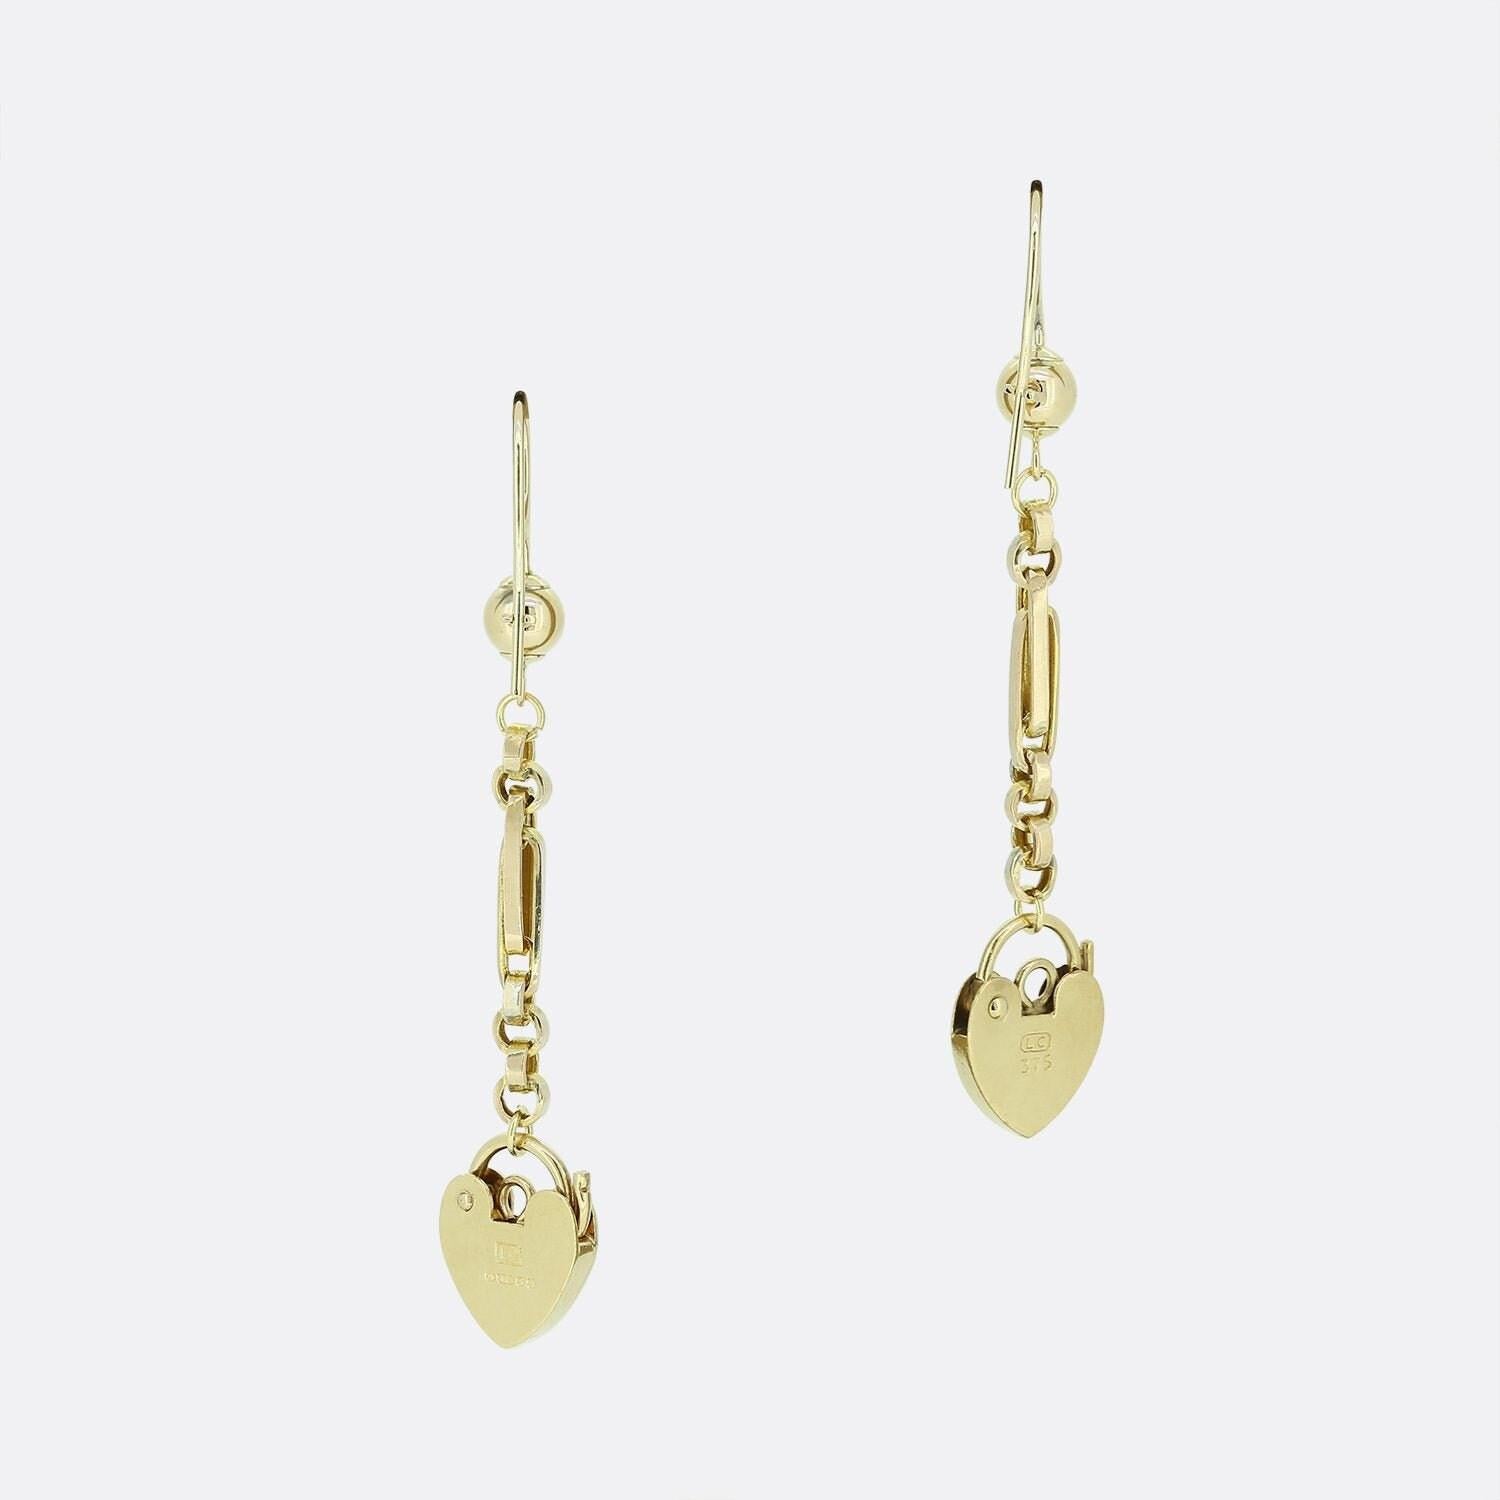 This is a pair of vintage 9ct yellow gold drop earrings. Each earring features a padlock charm that sits at the bottom of the fancy chain.

Condition: Used (Very Good)
Total Weight: 3.2 grams
Earring Dimensions: 45mm x 10mm (Height x